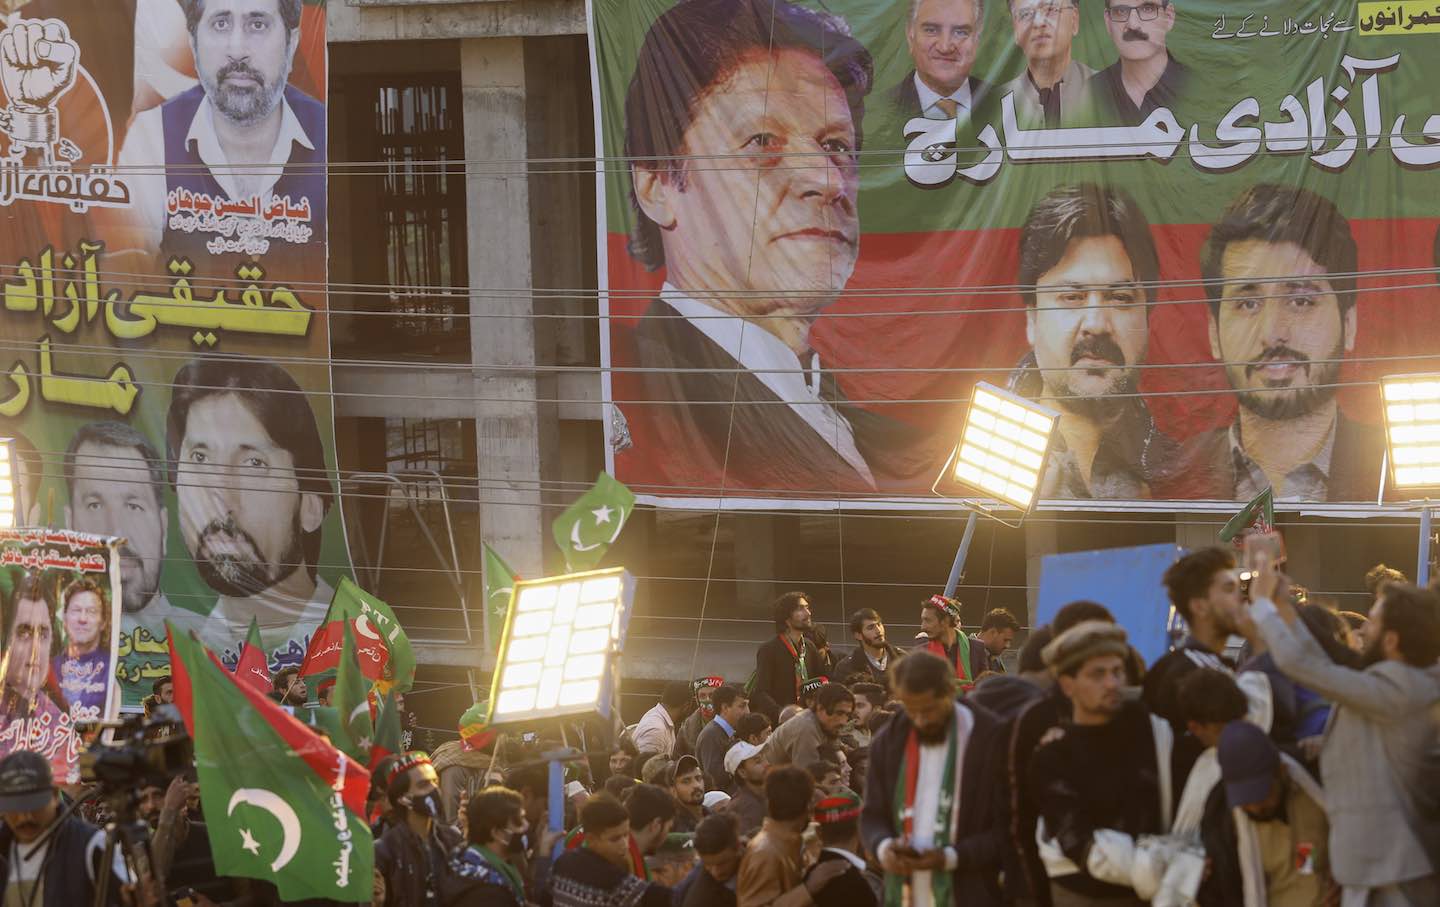 After an Attempt on Imran Khan’s Life, Pakistan Is in Crisis